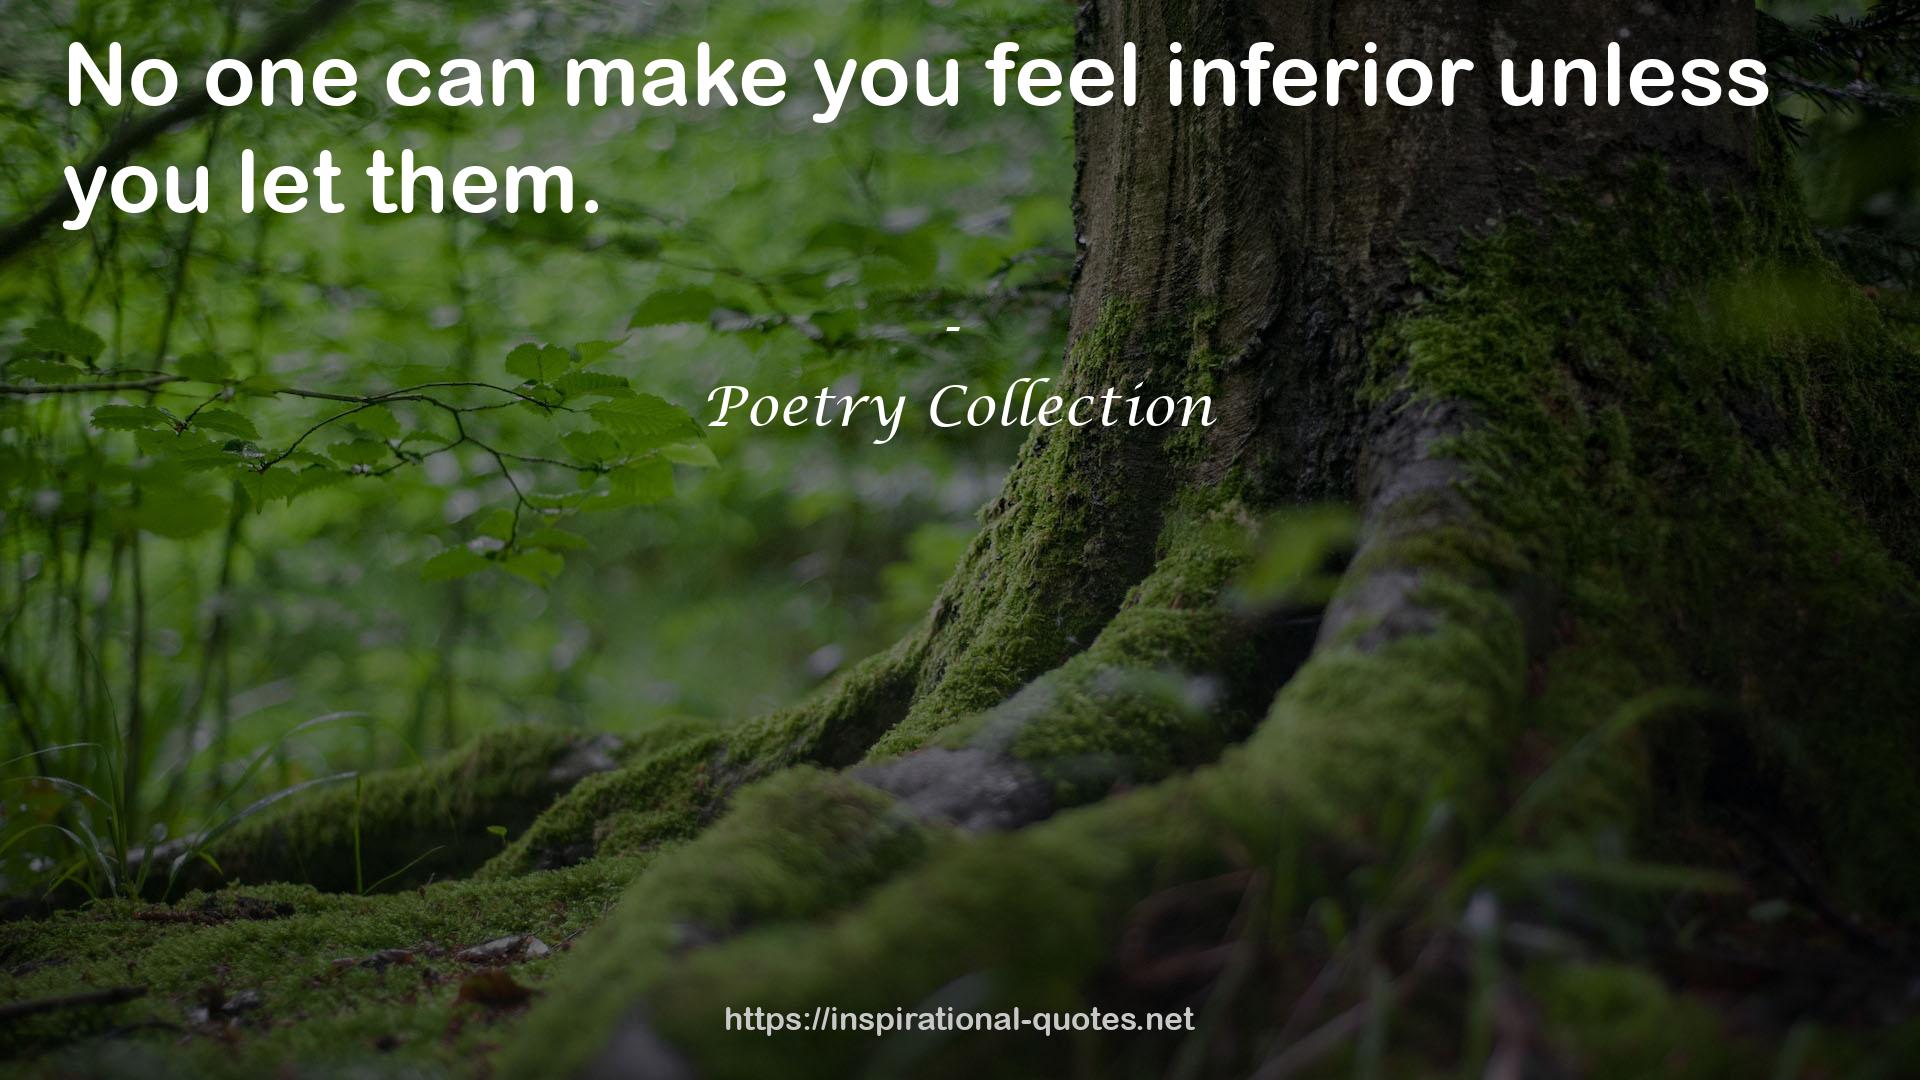 Poetry Collection QUOTES